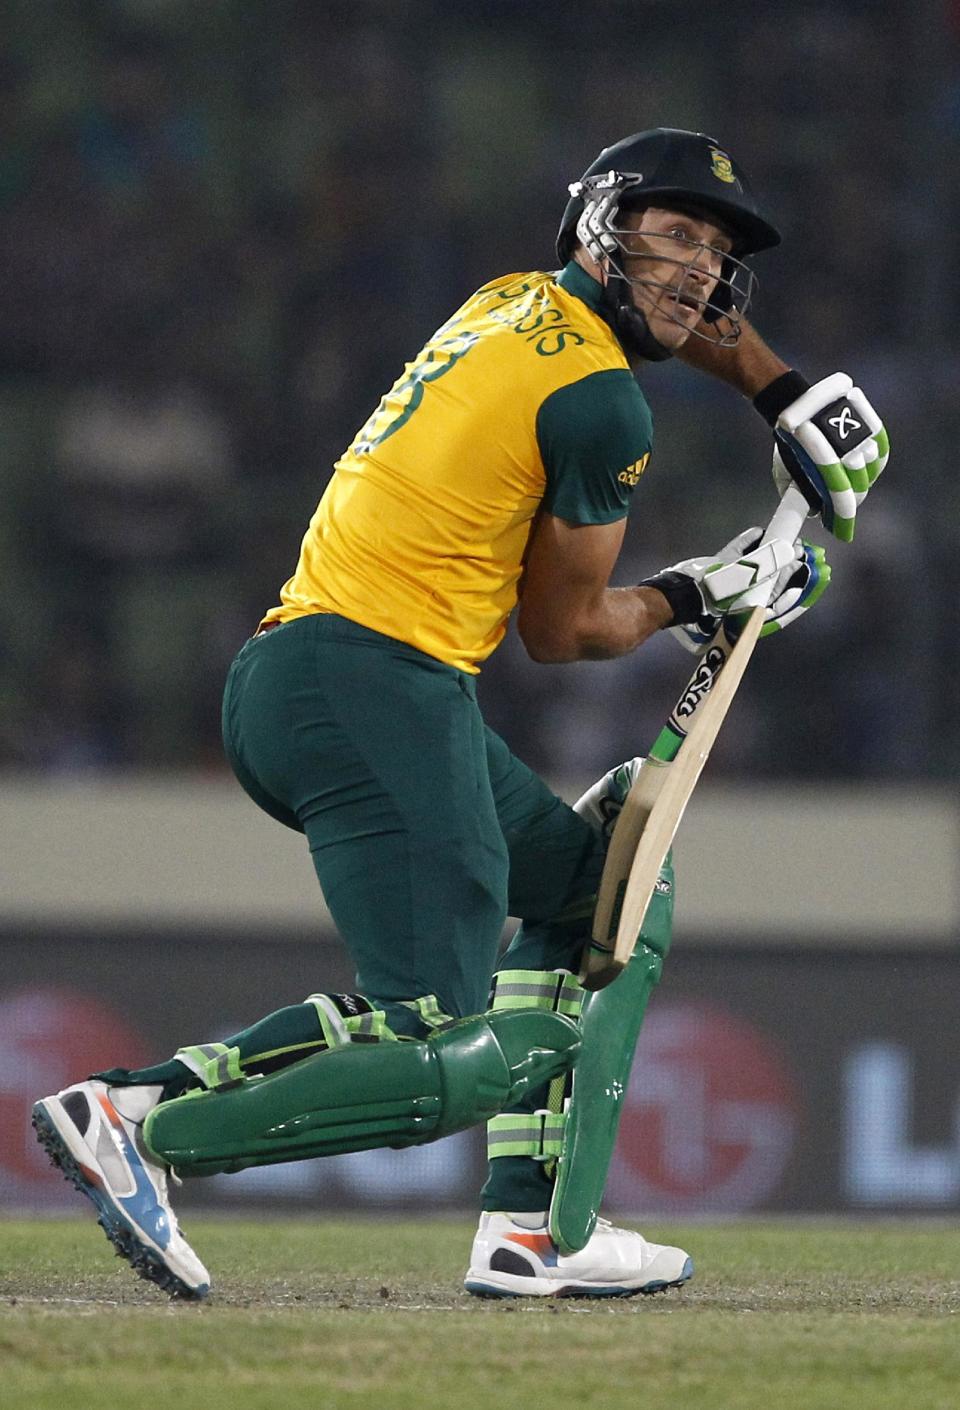 South Africa's captain Francois du Plessis plays a shot during their ICC Twenty20 Cricket World Cup semifinal match against India in Dhaka, Bangladesh, Friday, April 4, 2014.(AP Photo/A.M. Ahad)